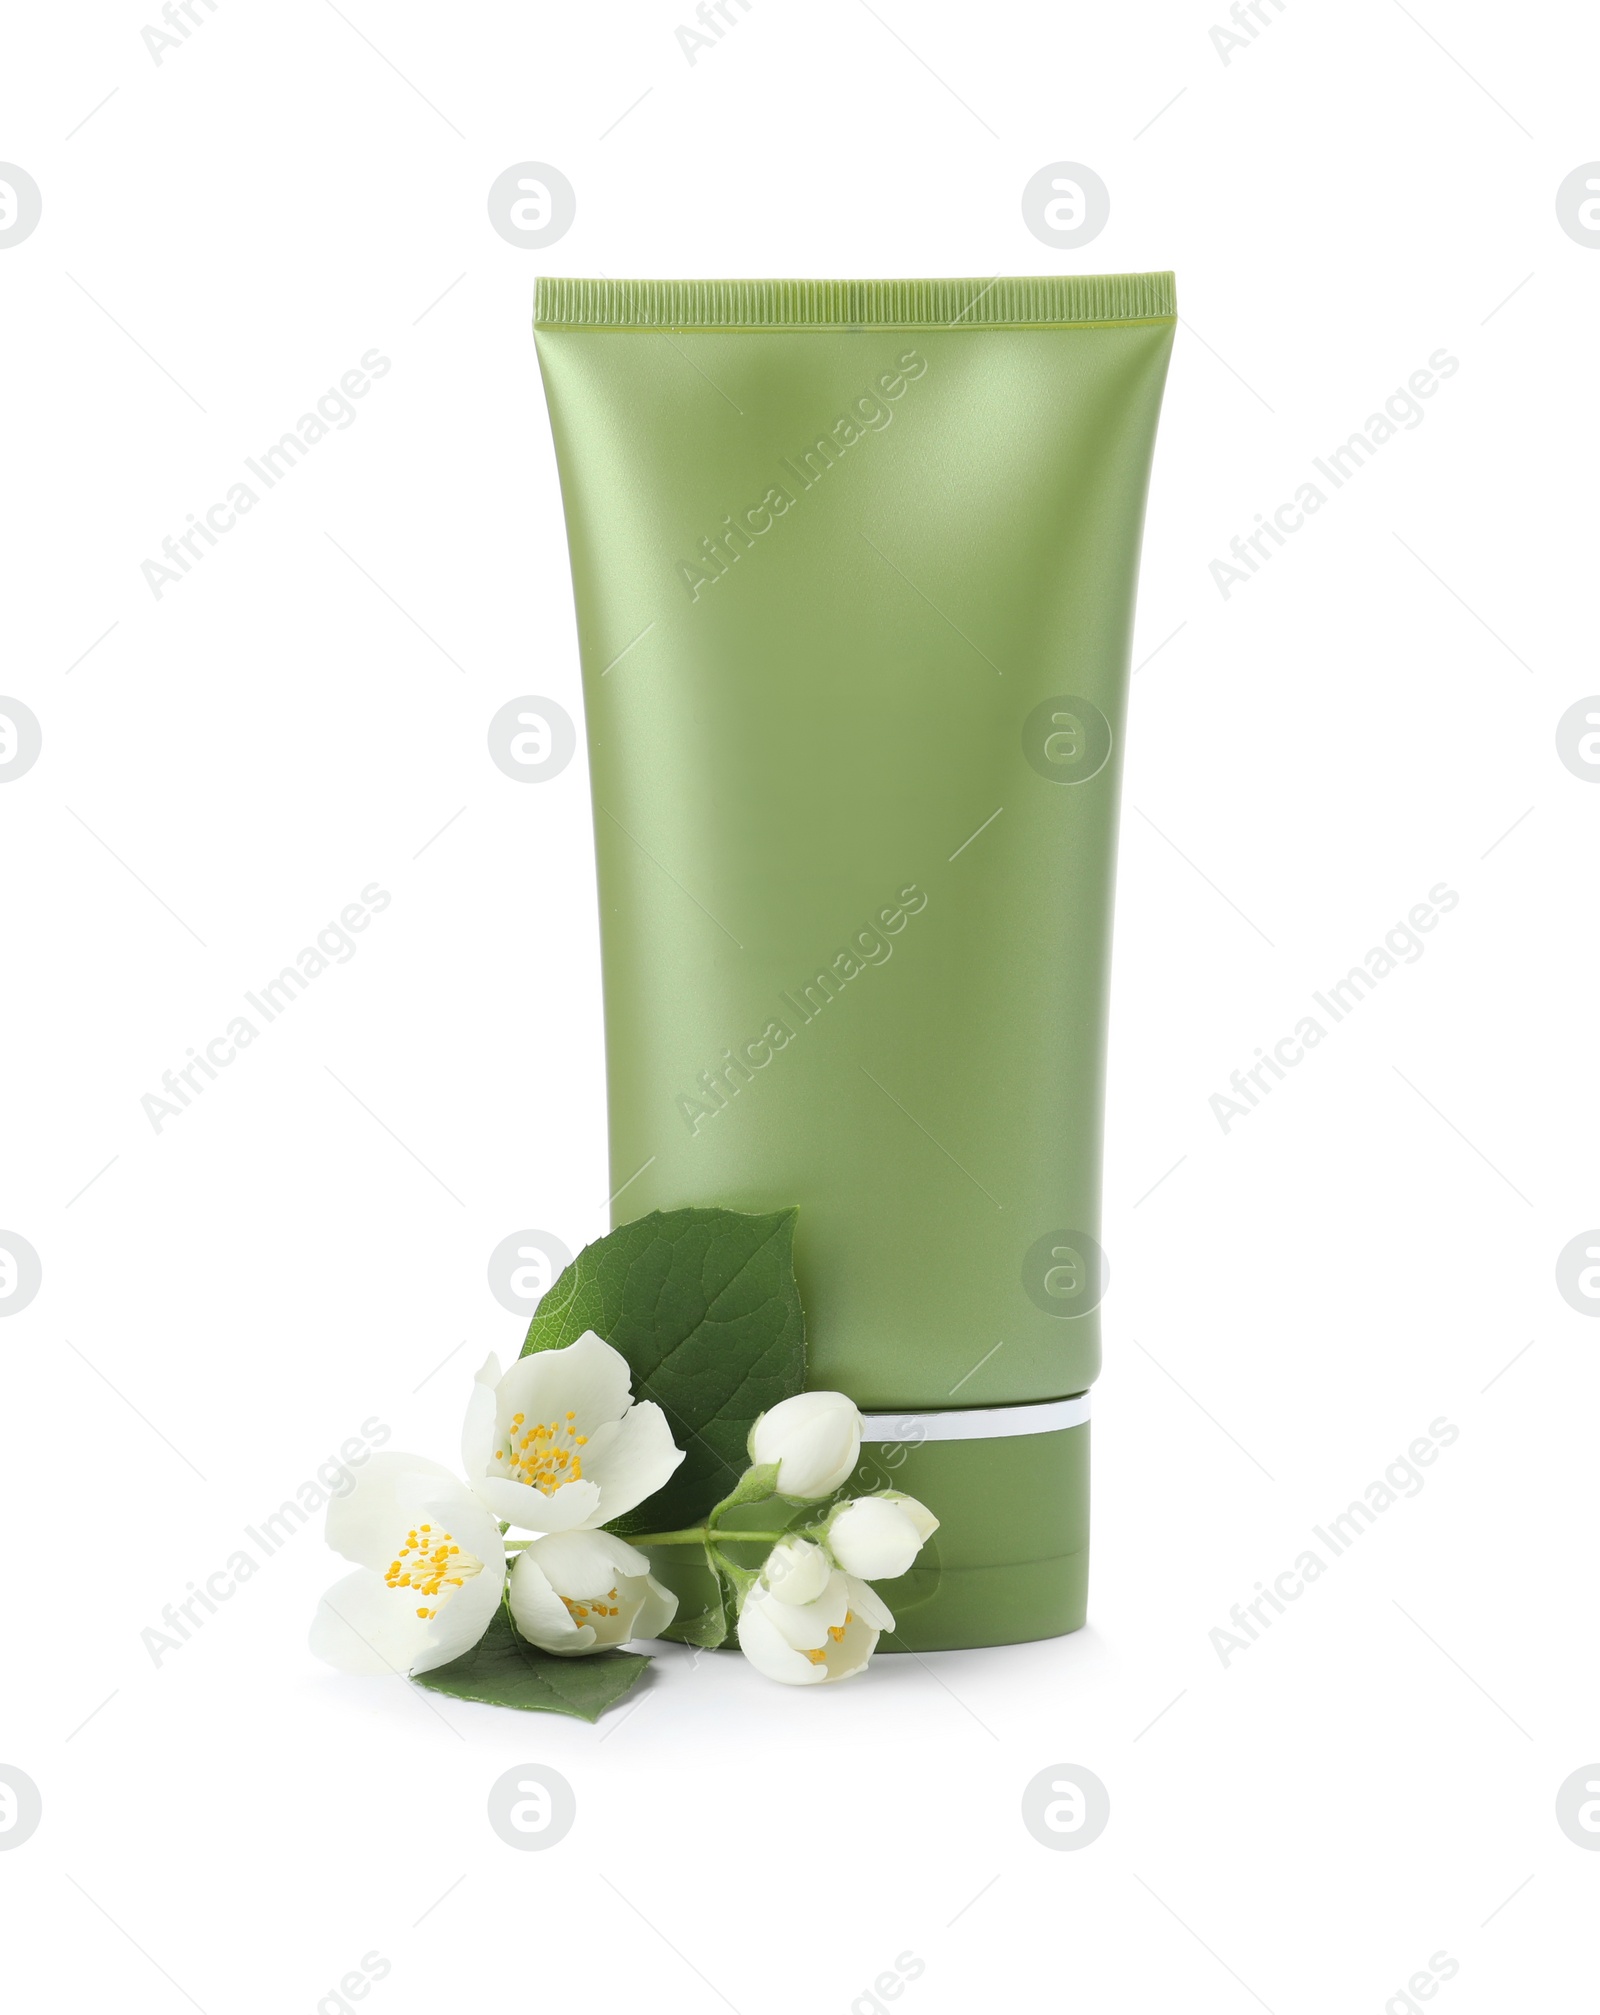 Photo of Tube of cosmetic product and flowers isolated on white